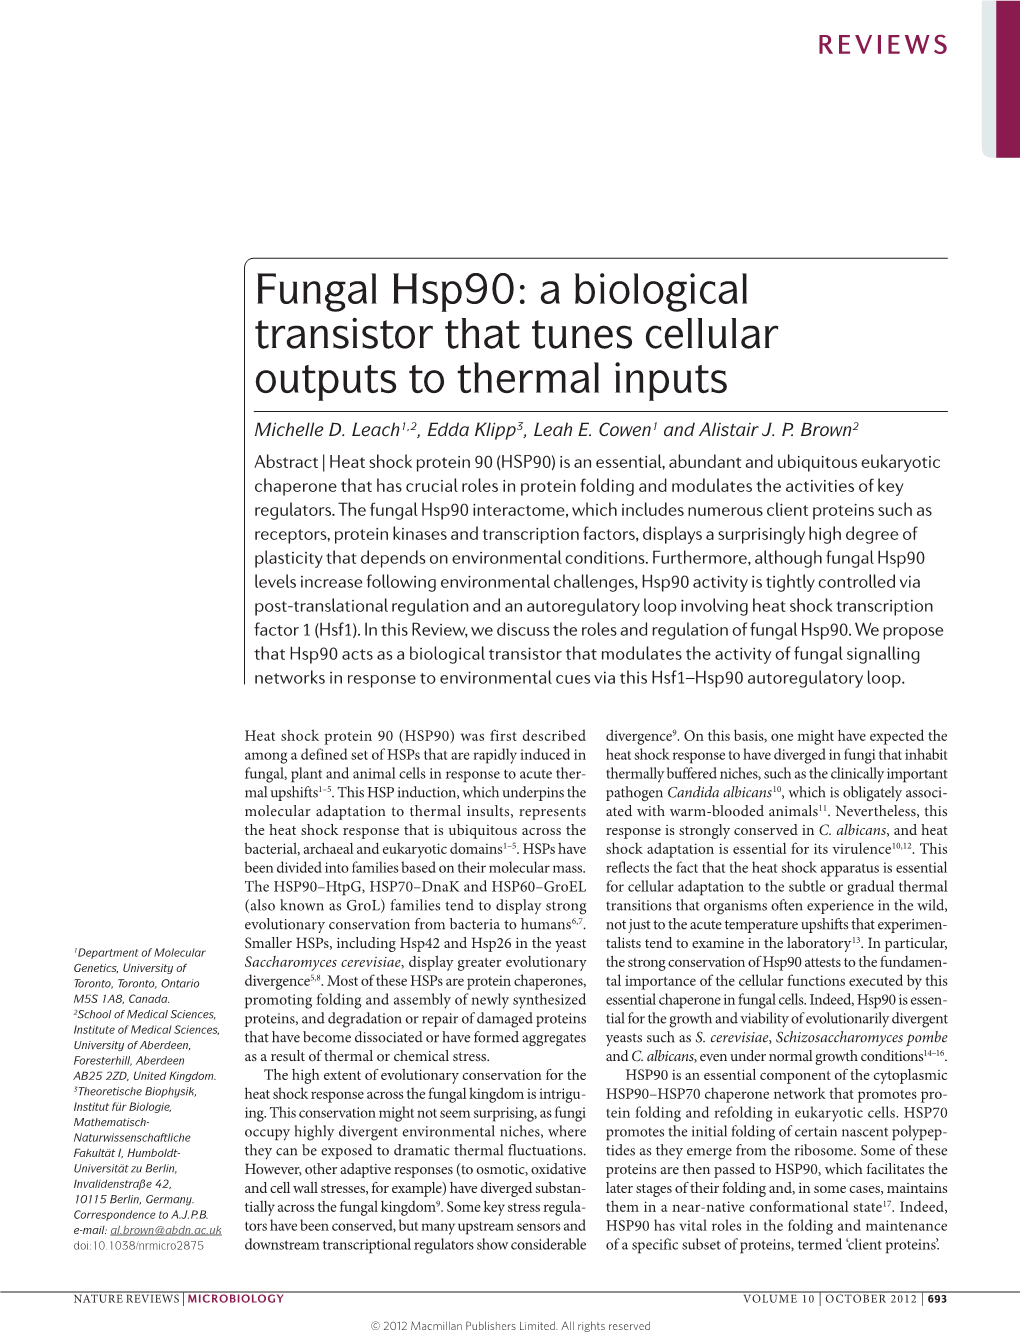 Fungal Hsp90: a Biological Transistor That Tunes Cellular Outputs to Thermal Inputs